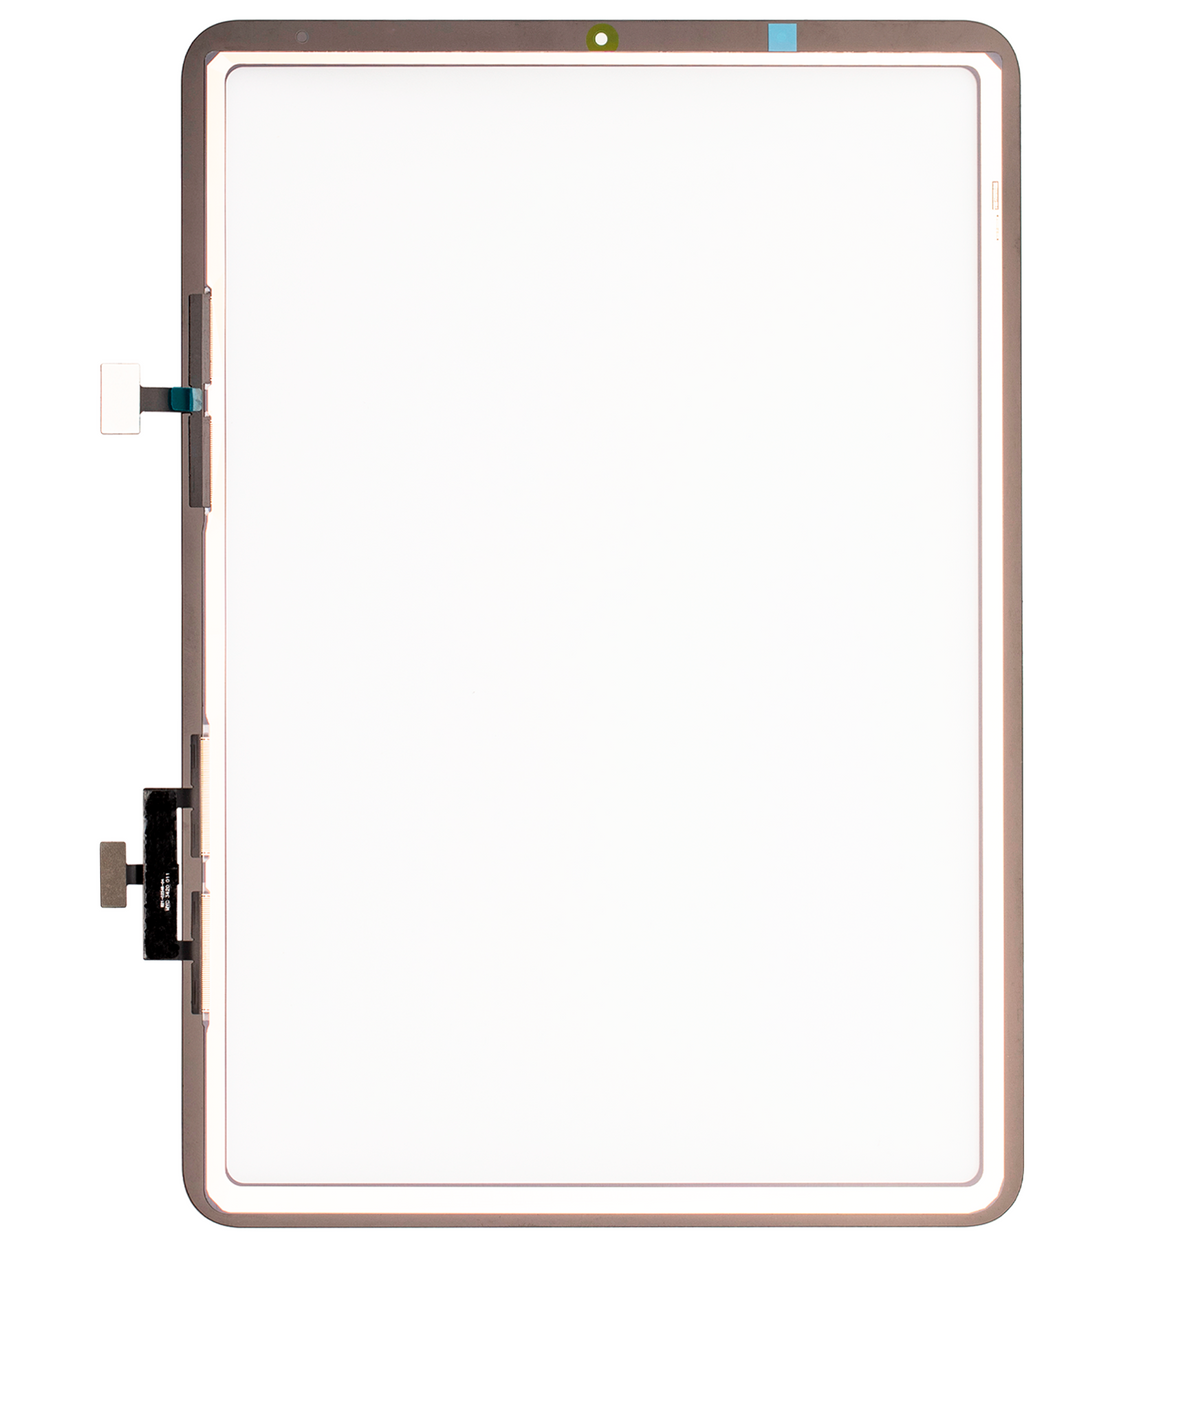 DIGITIZER (GLASS SEPARATION REQUIRED) (4G VERSION) FOR IPAD AIR 4